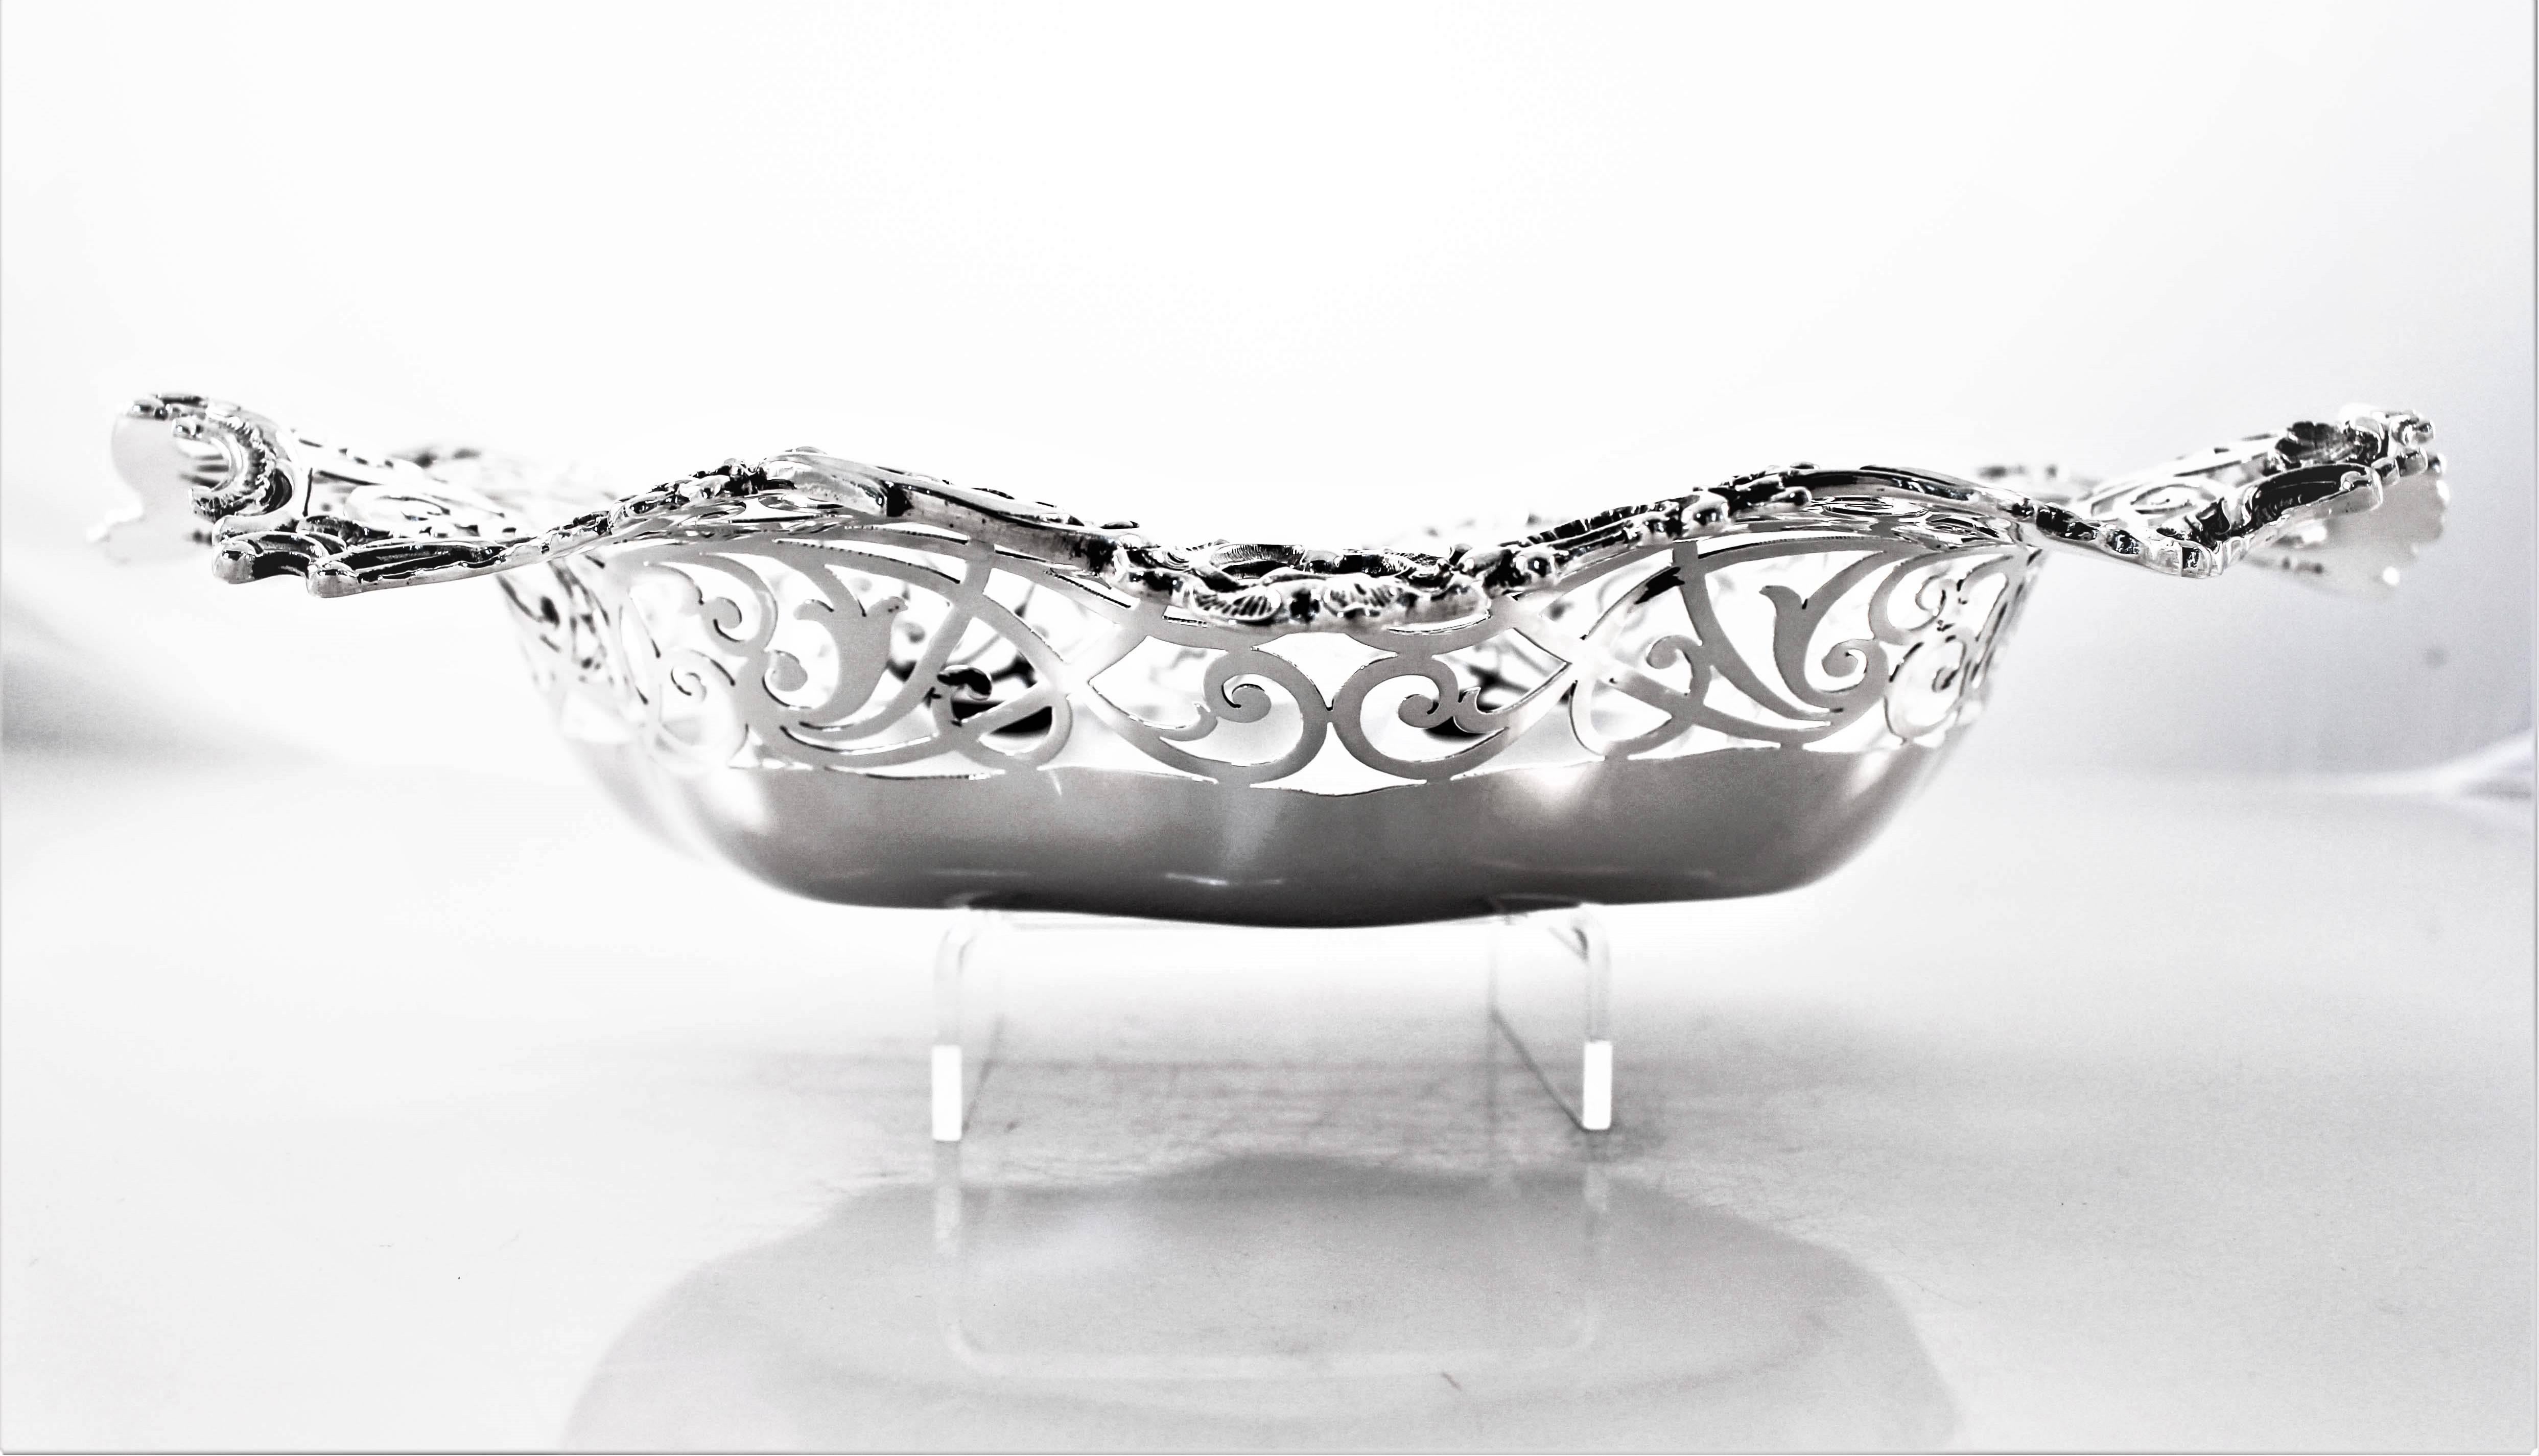 We took great pride in restoring this gem of antique silver. Every ding and scratch was meticulously removed, in the end we had the original piece as it was back in 1893. A scalloped rim with open-work and the original hand engraved monogram in the